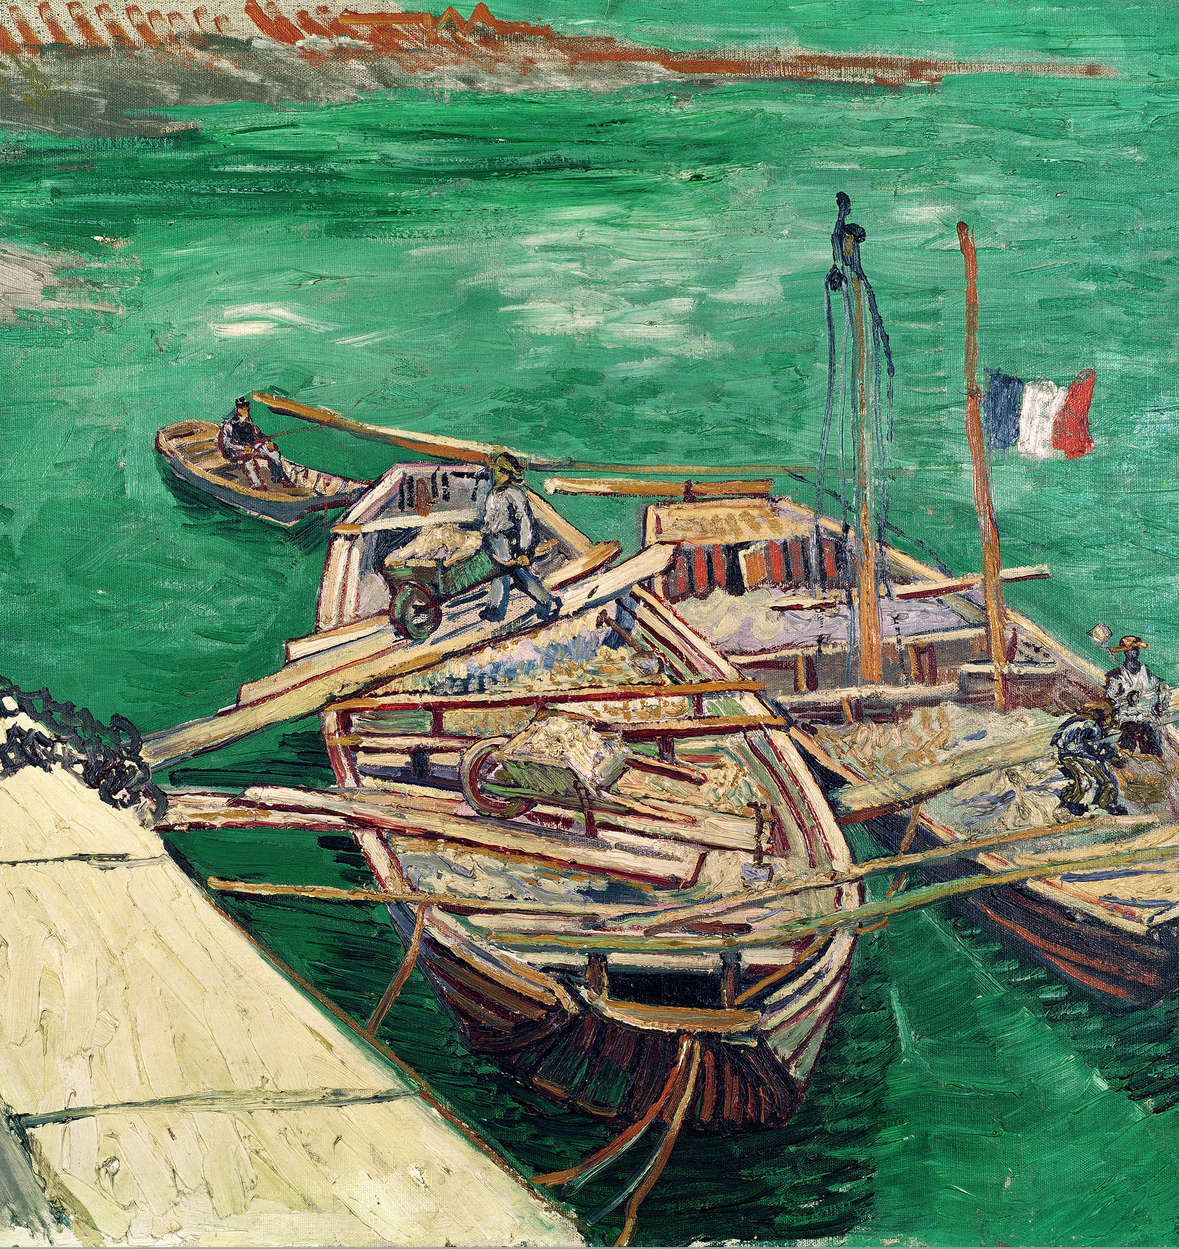             Photo wallpaper "Landing stage with boats" by Vincent van Gogh
        